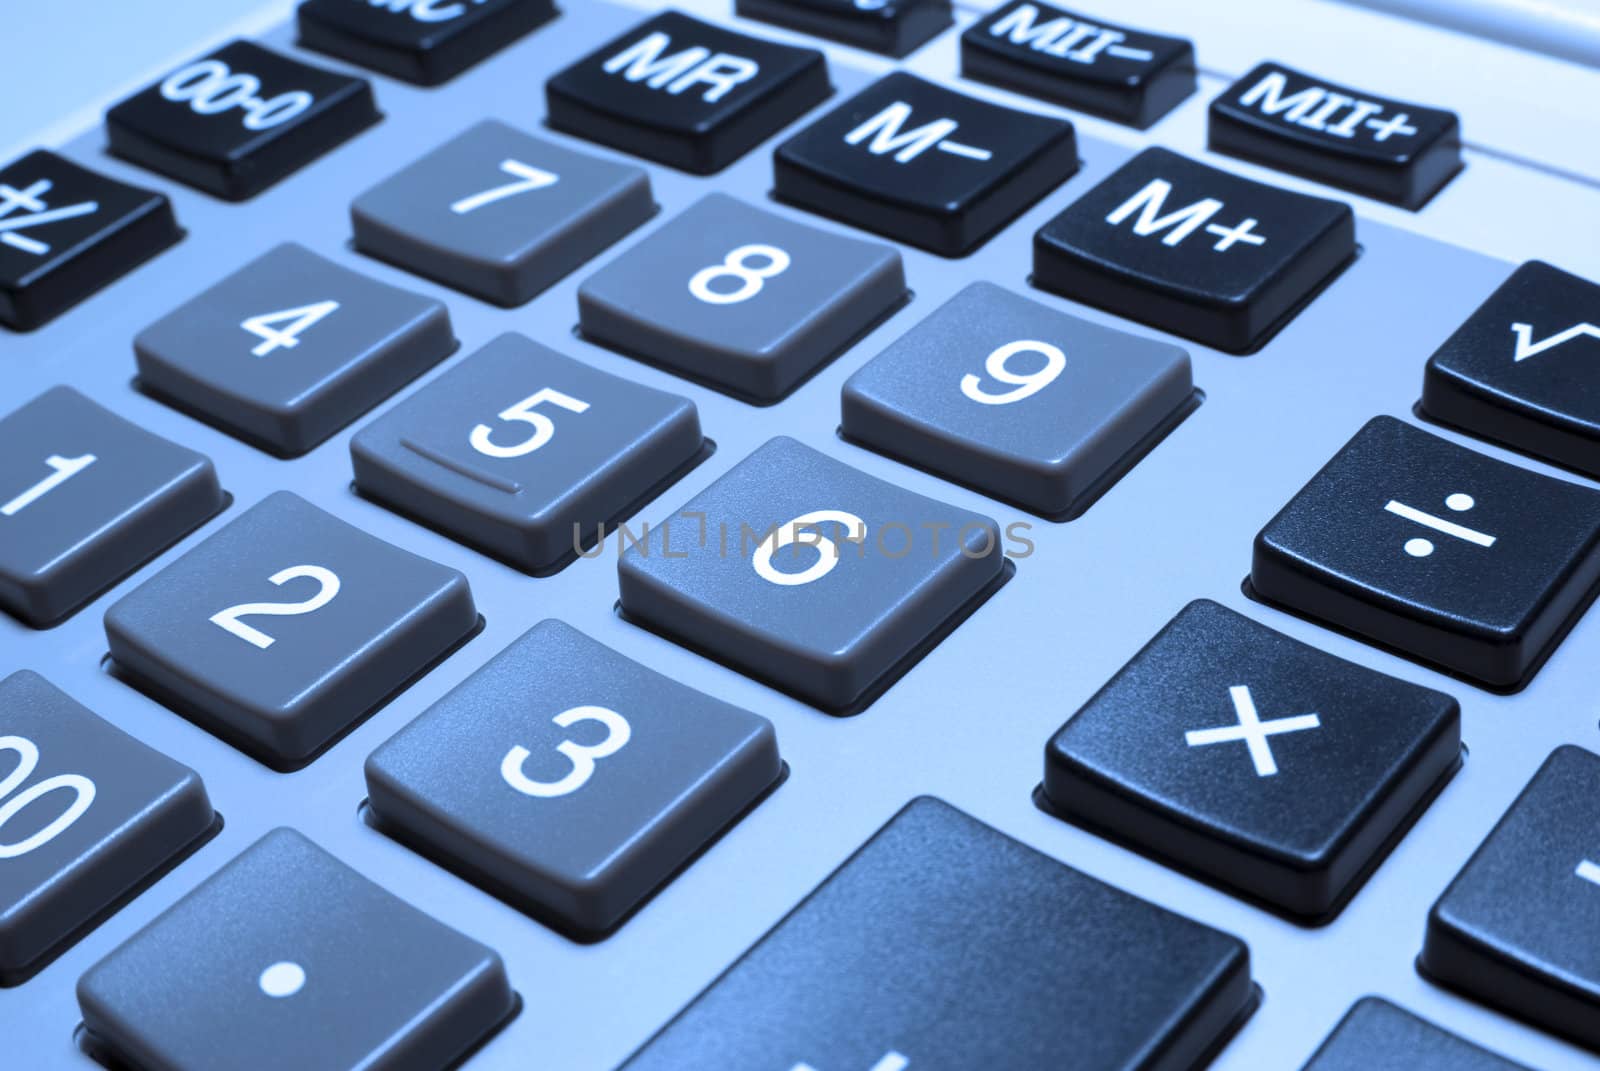 Calculator closeup with cold photo filter. by borodaev